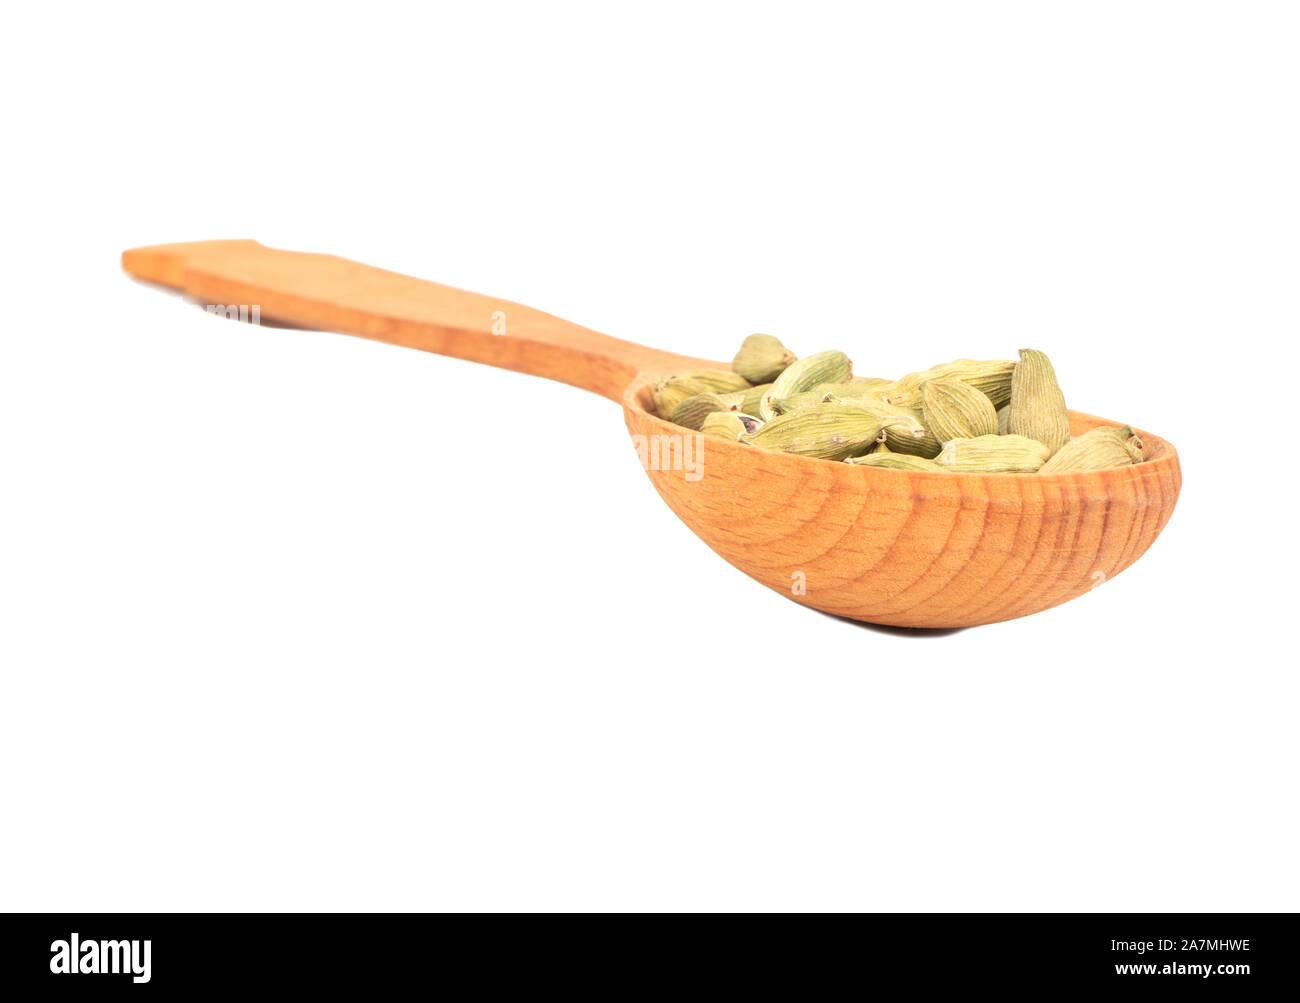 Large wooden spoon with dry cardamom isolated on white background Stock Photo